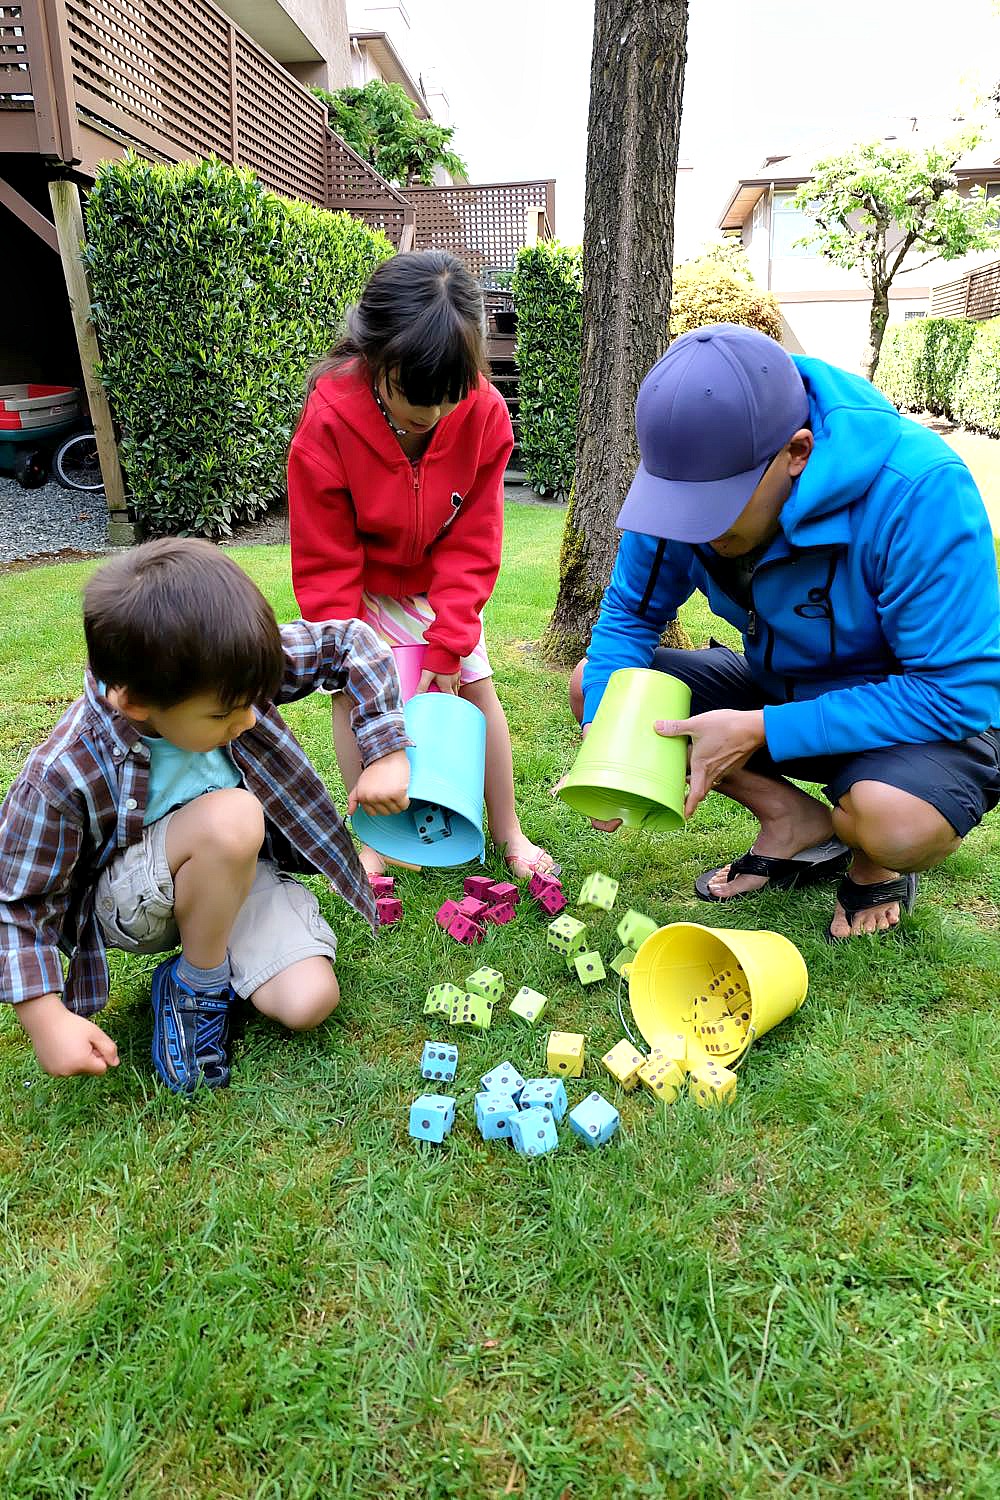 Summer just got a whole lot more fun with this fabulous weekend family project! Create your own set of brightly colored, DIY Outdoor Yard Tenzi Dice with the fun #sponsored tutorial using Rustoleum spraypaint! 